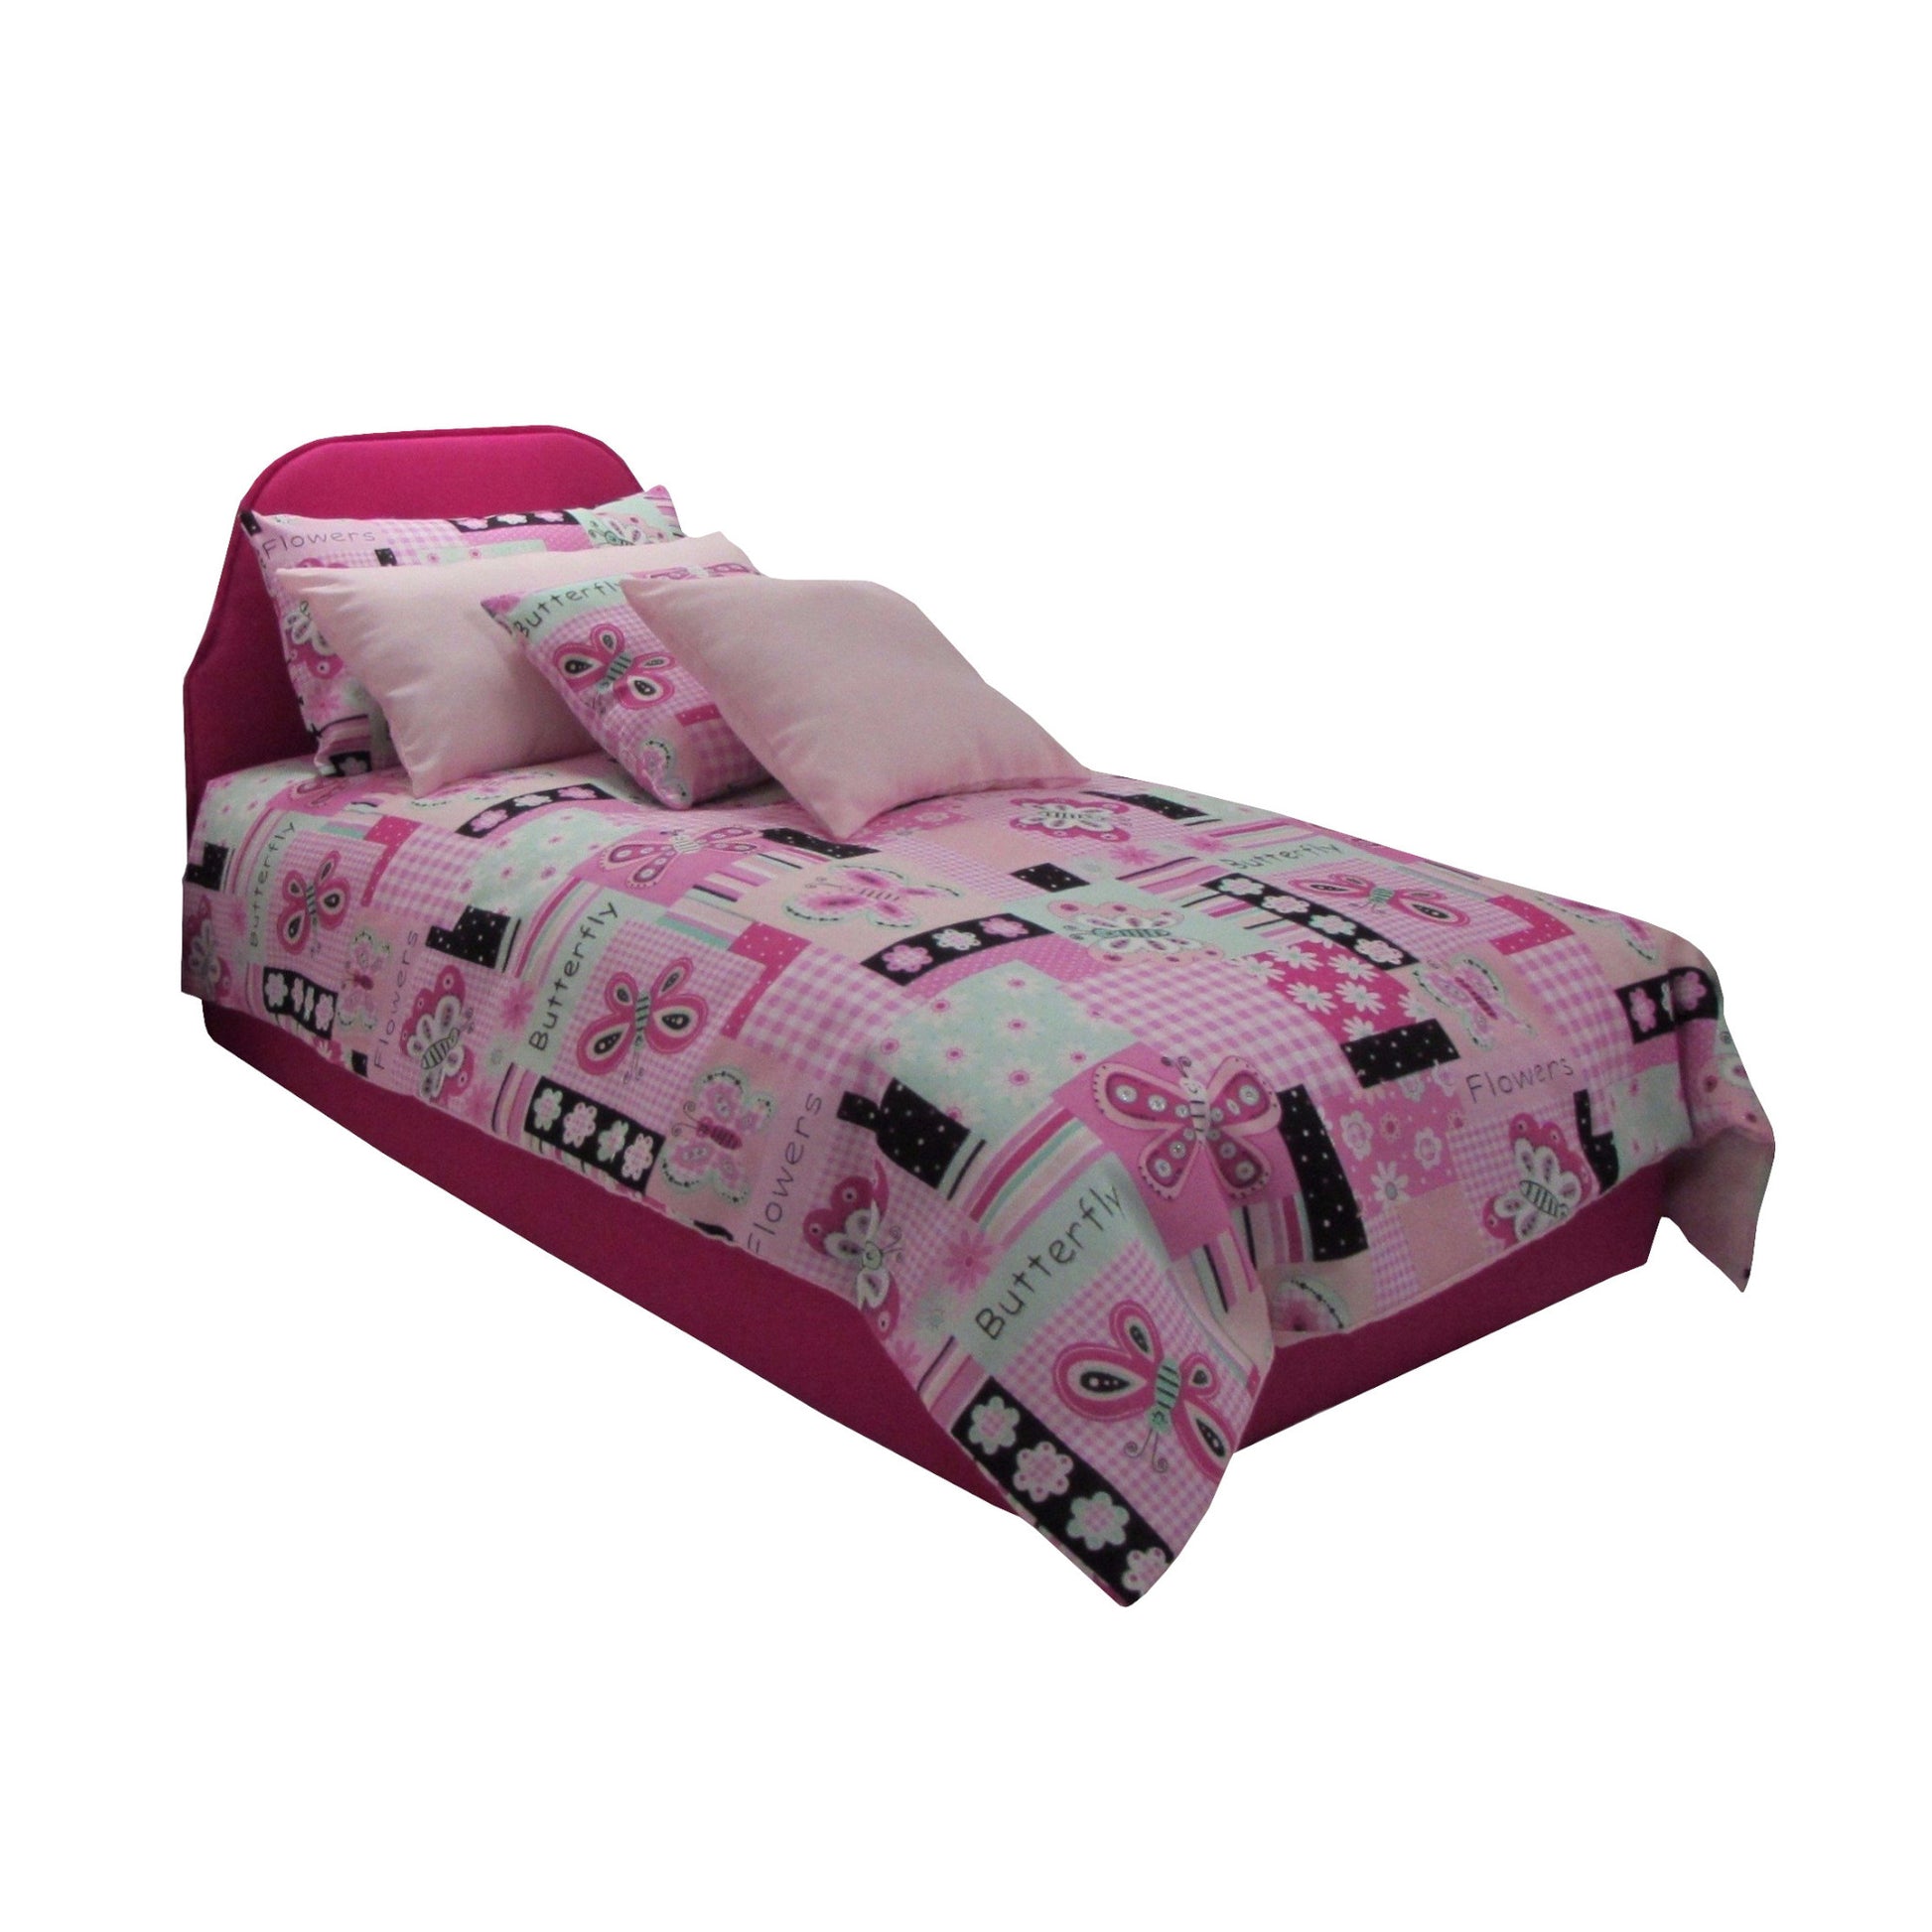 Pink Patchwork Doll Bedding for 18-inch dolls